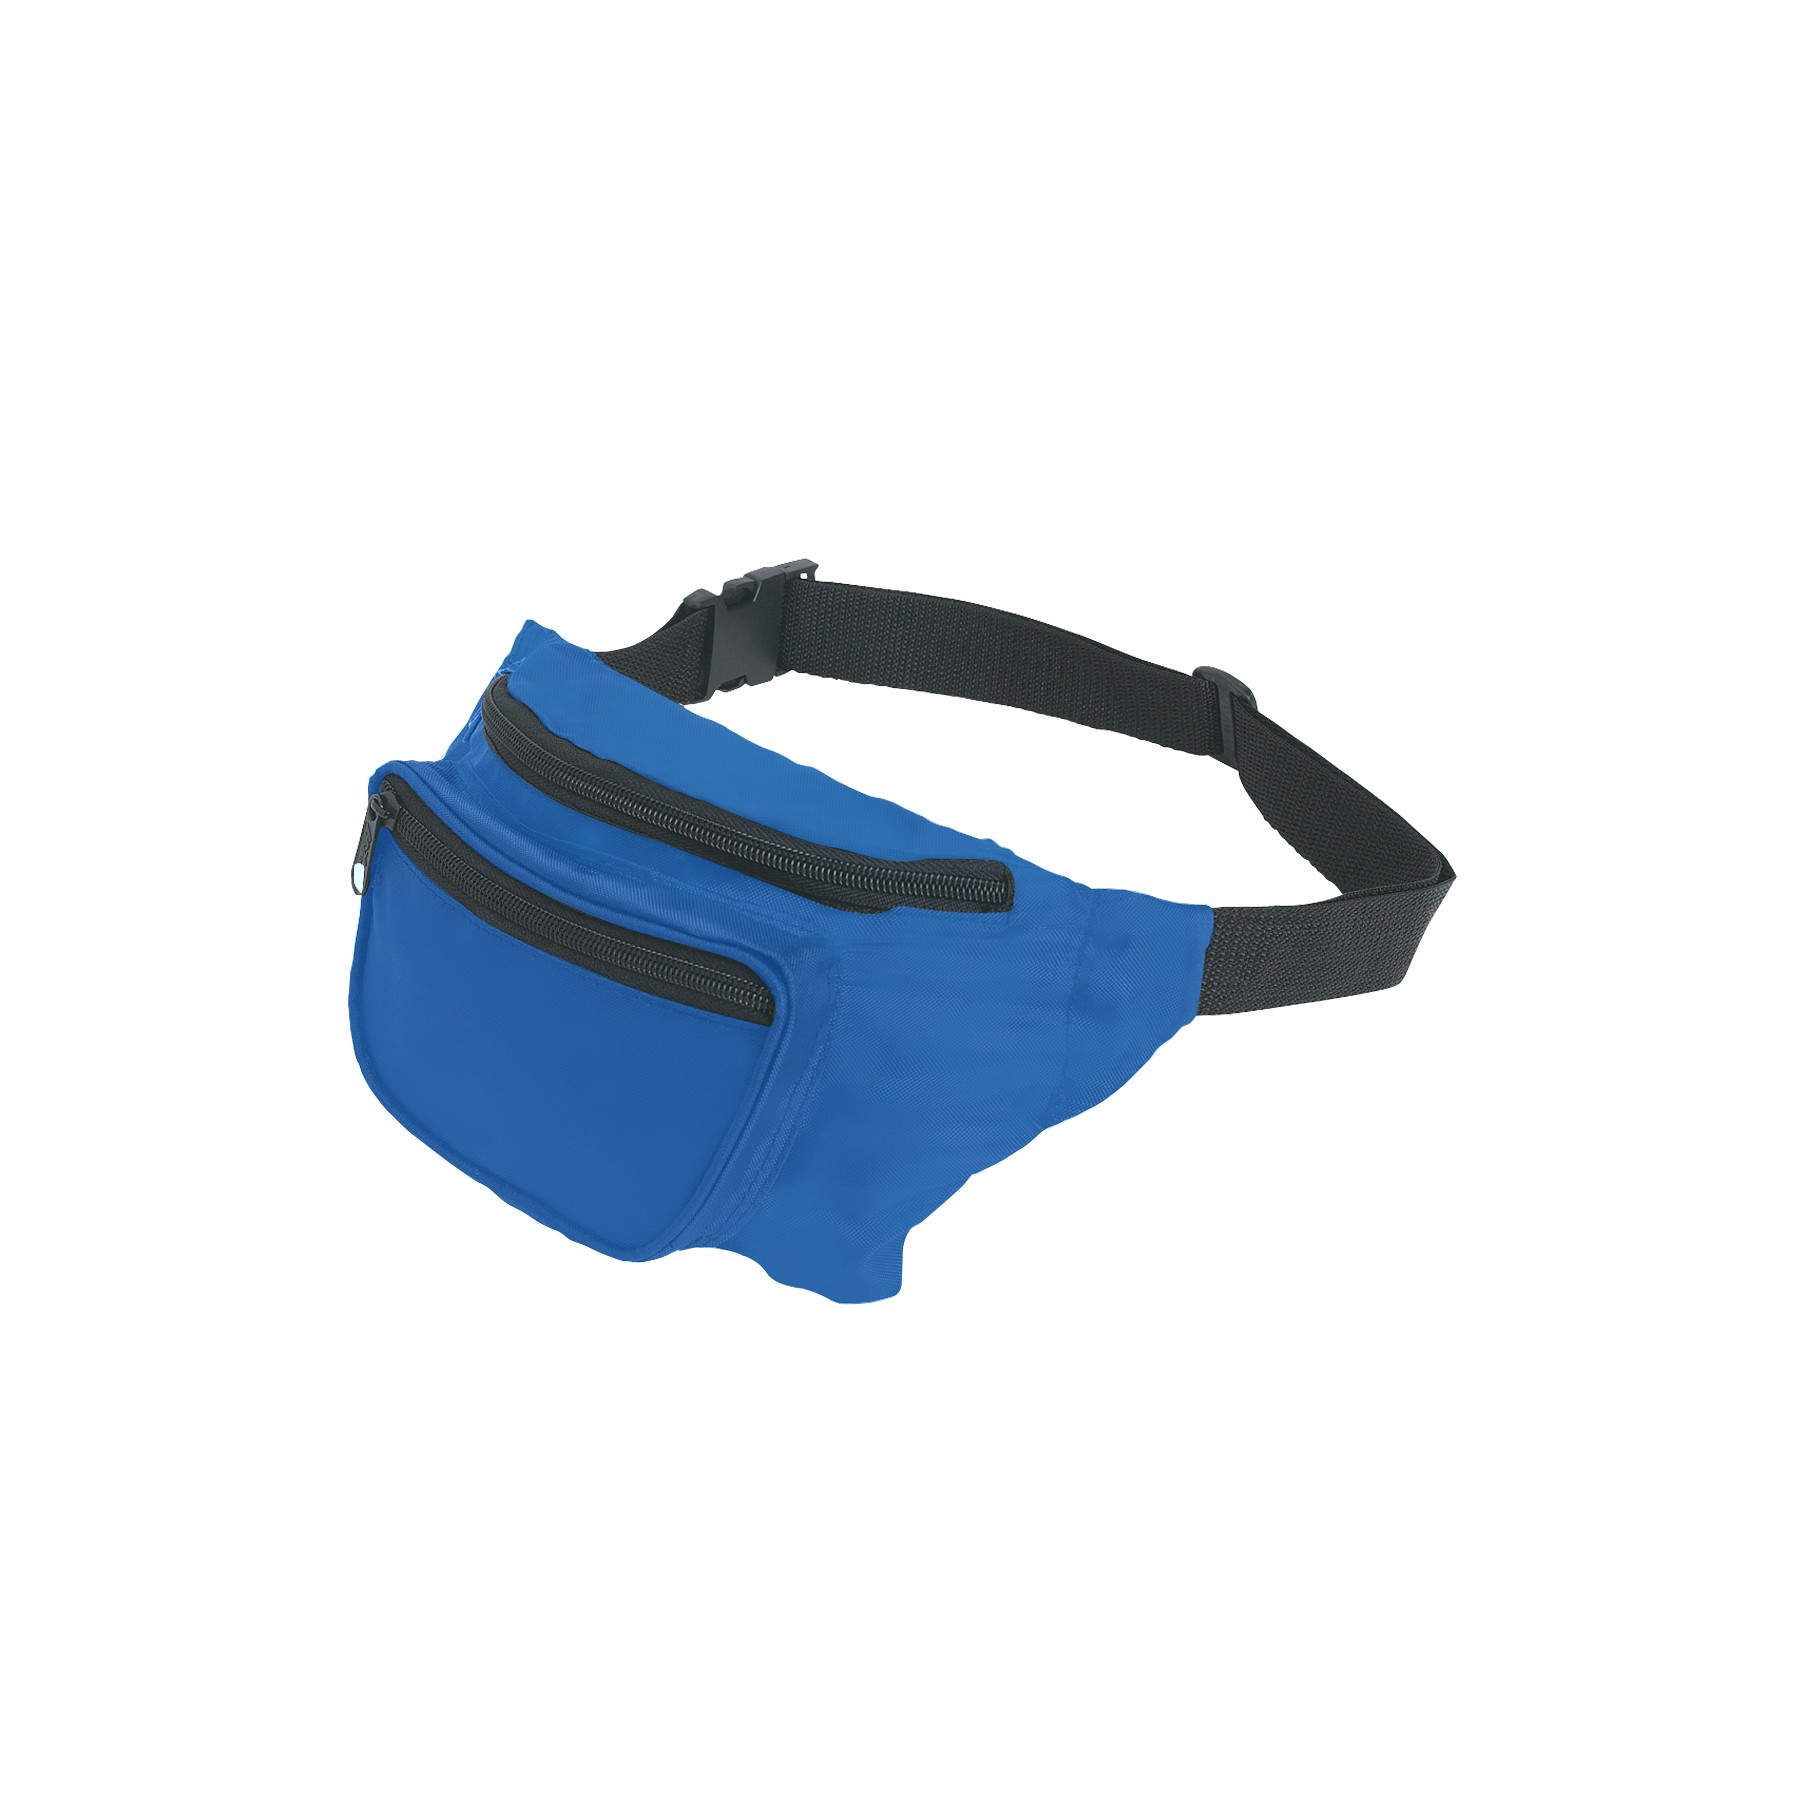 BT-0335 3 pockets fanny packs with logo printed